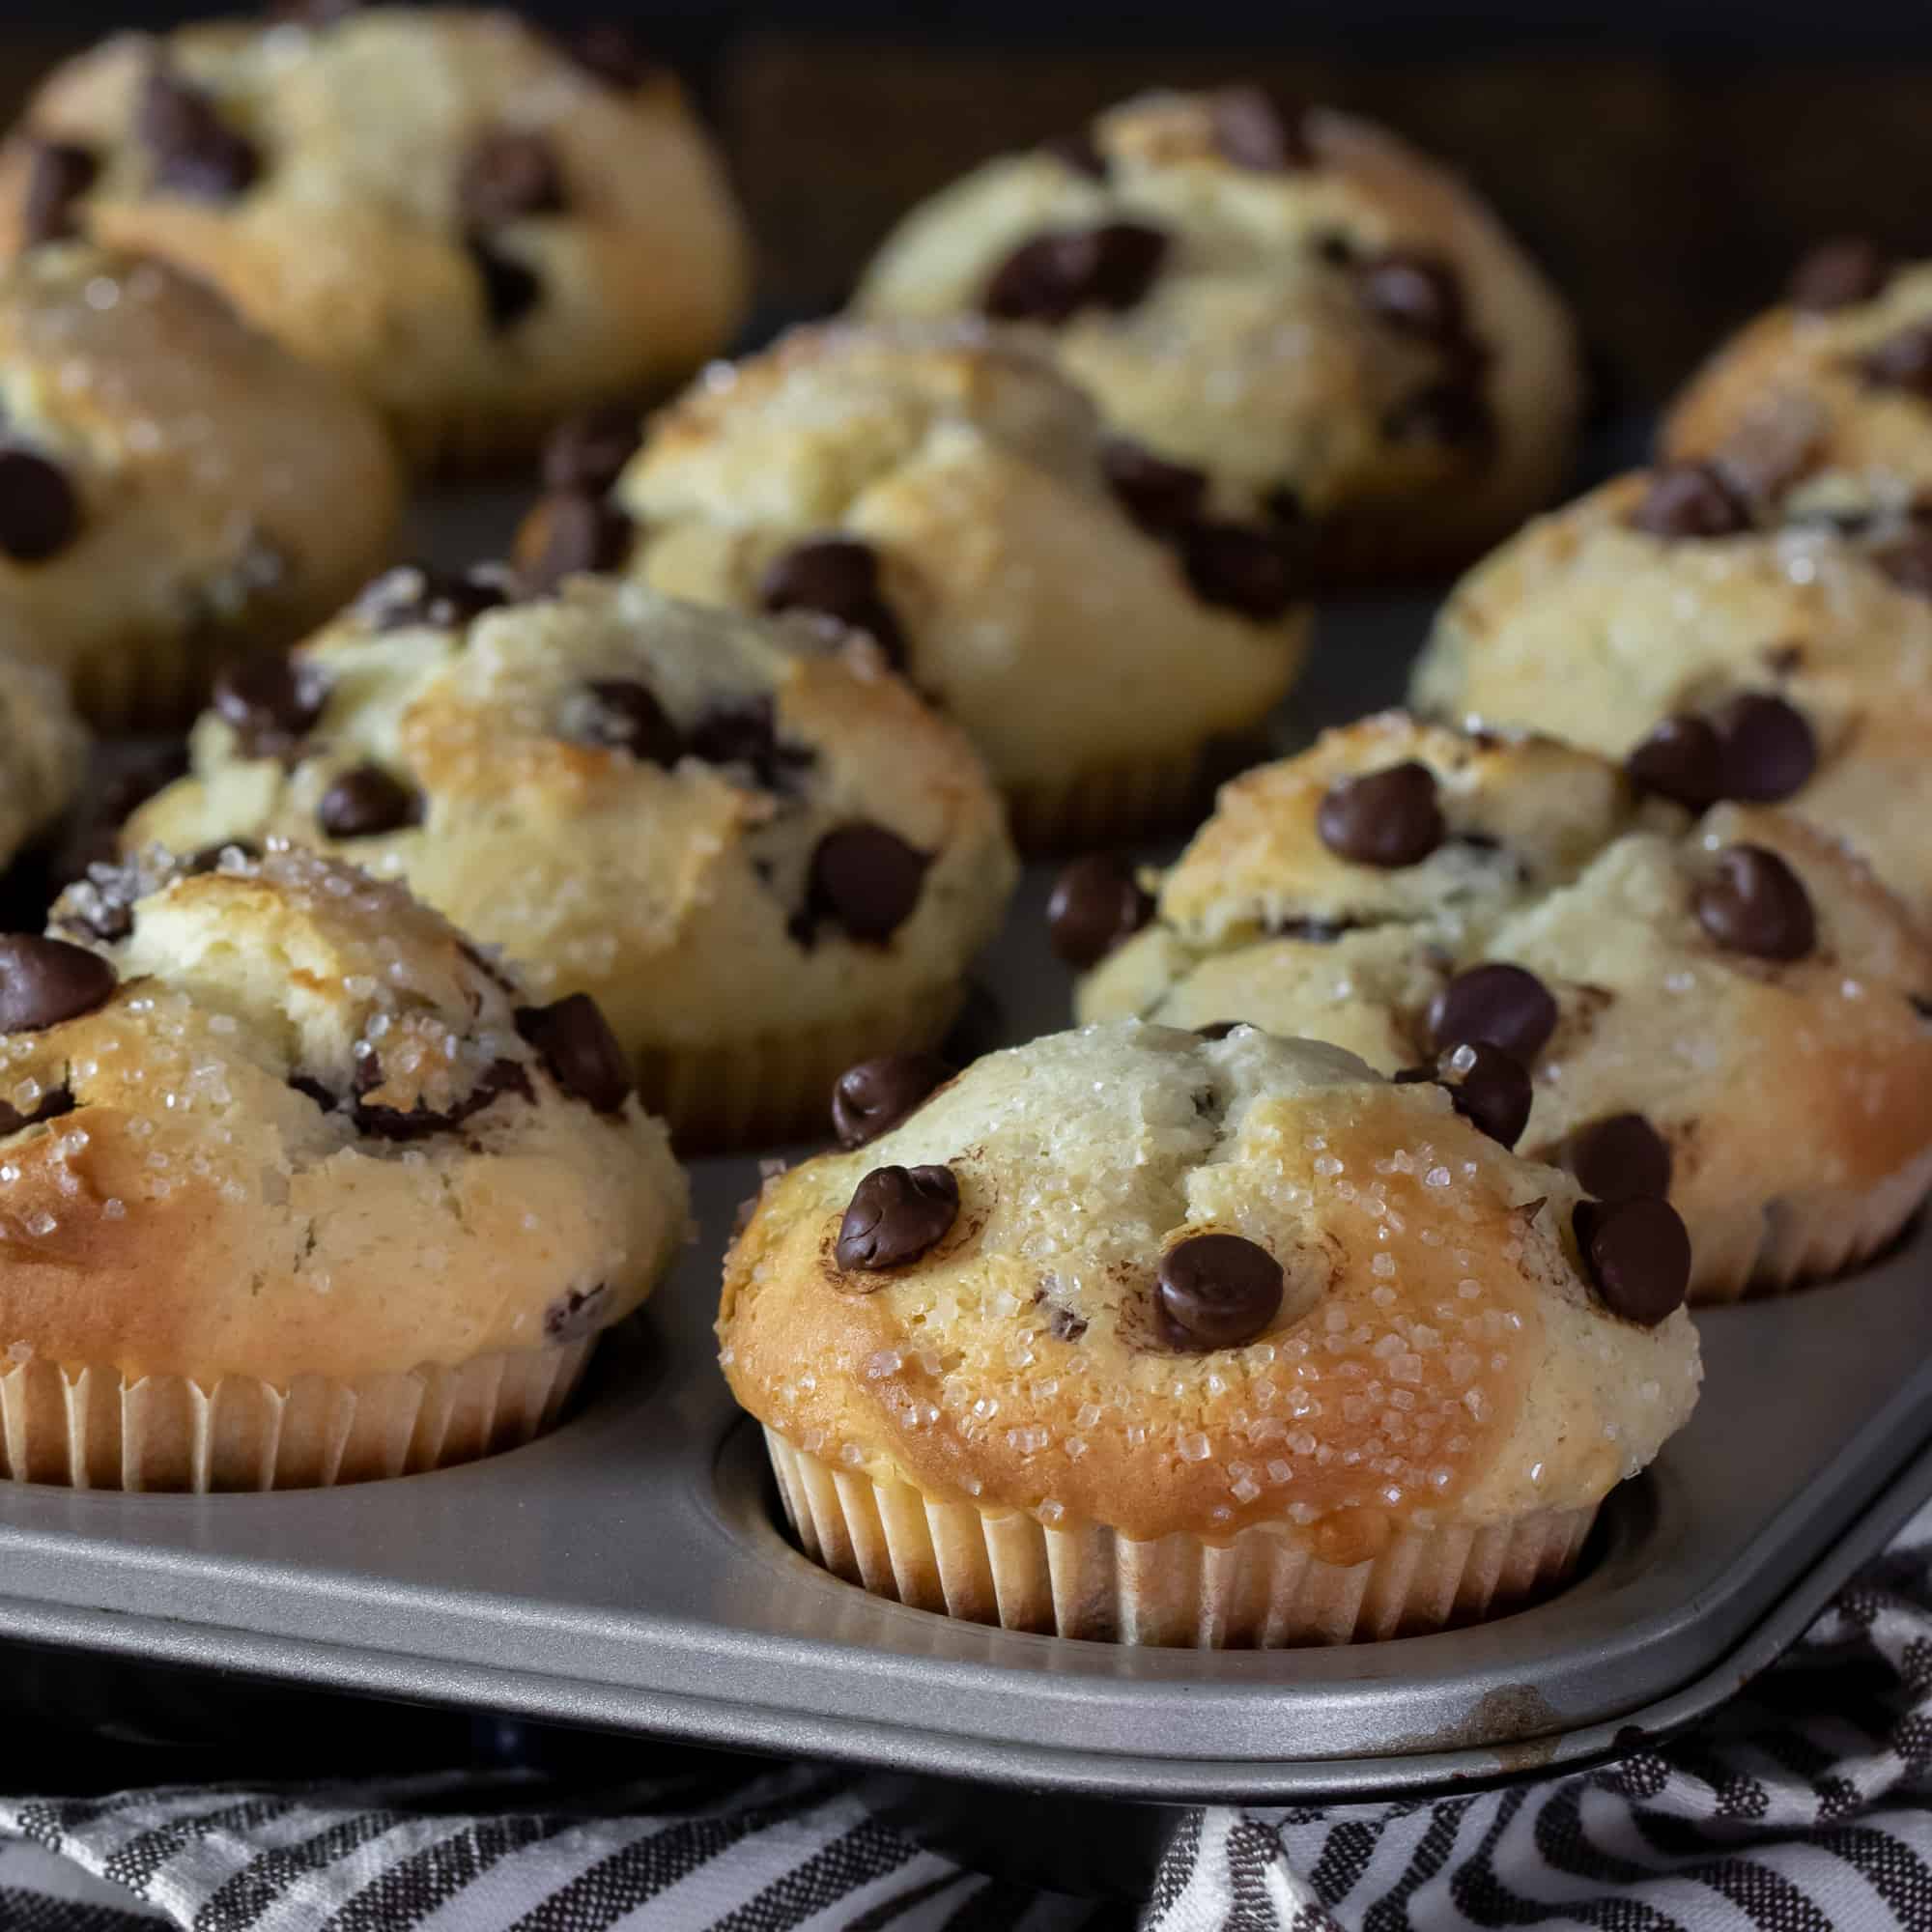 Fresh baked chocolate chip muffins at 400F for 15 to 18 minutes.